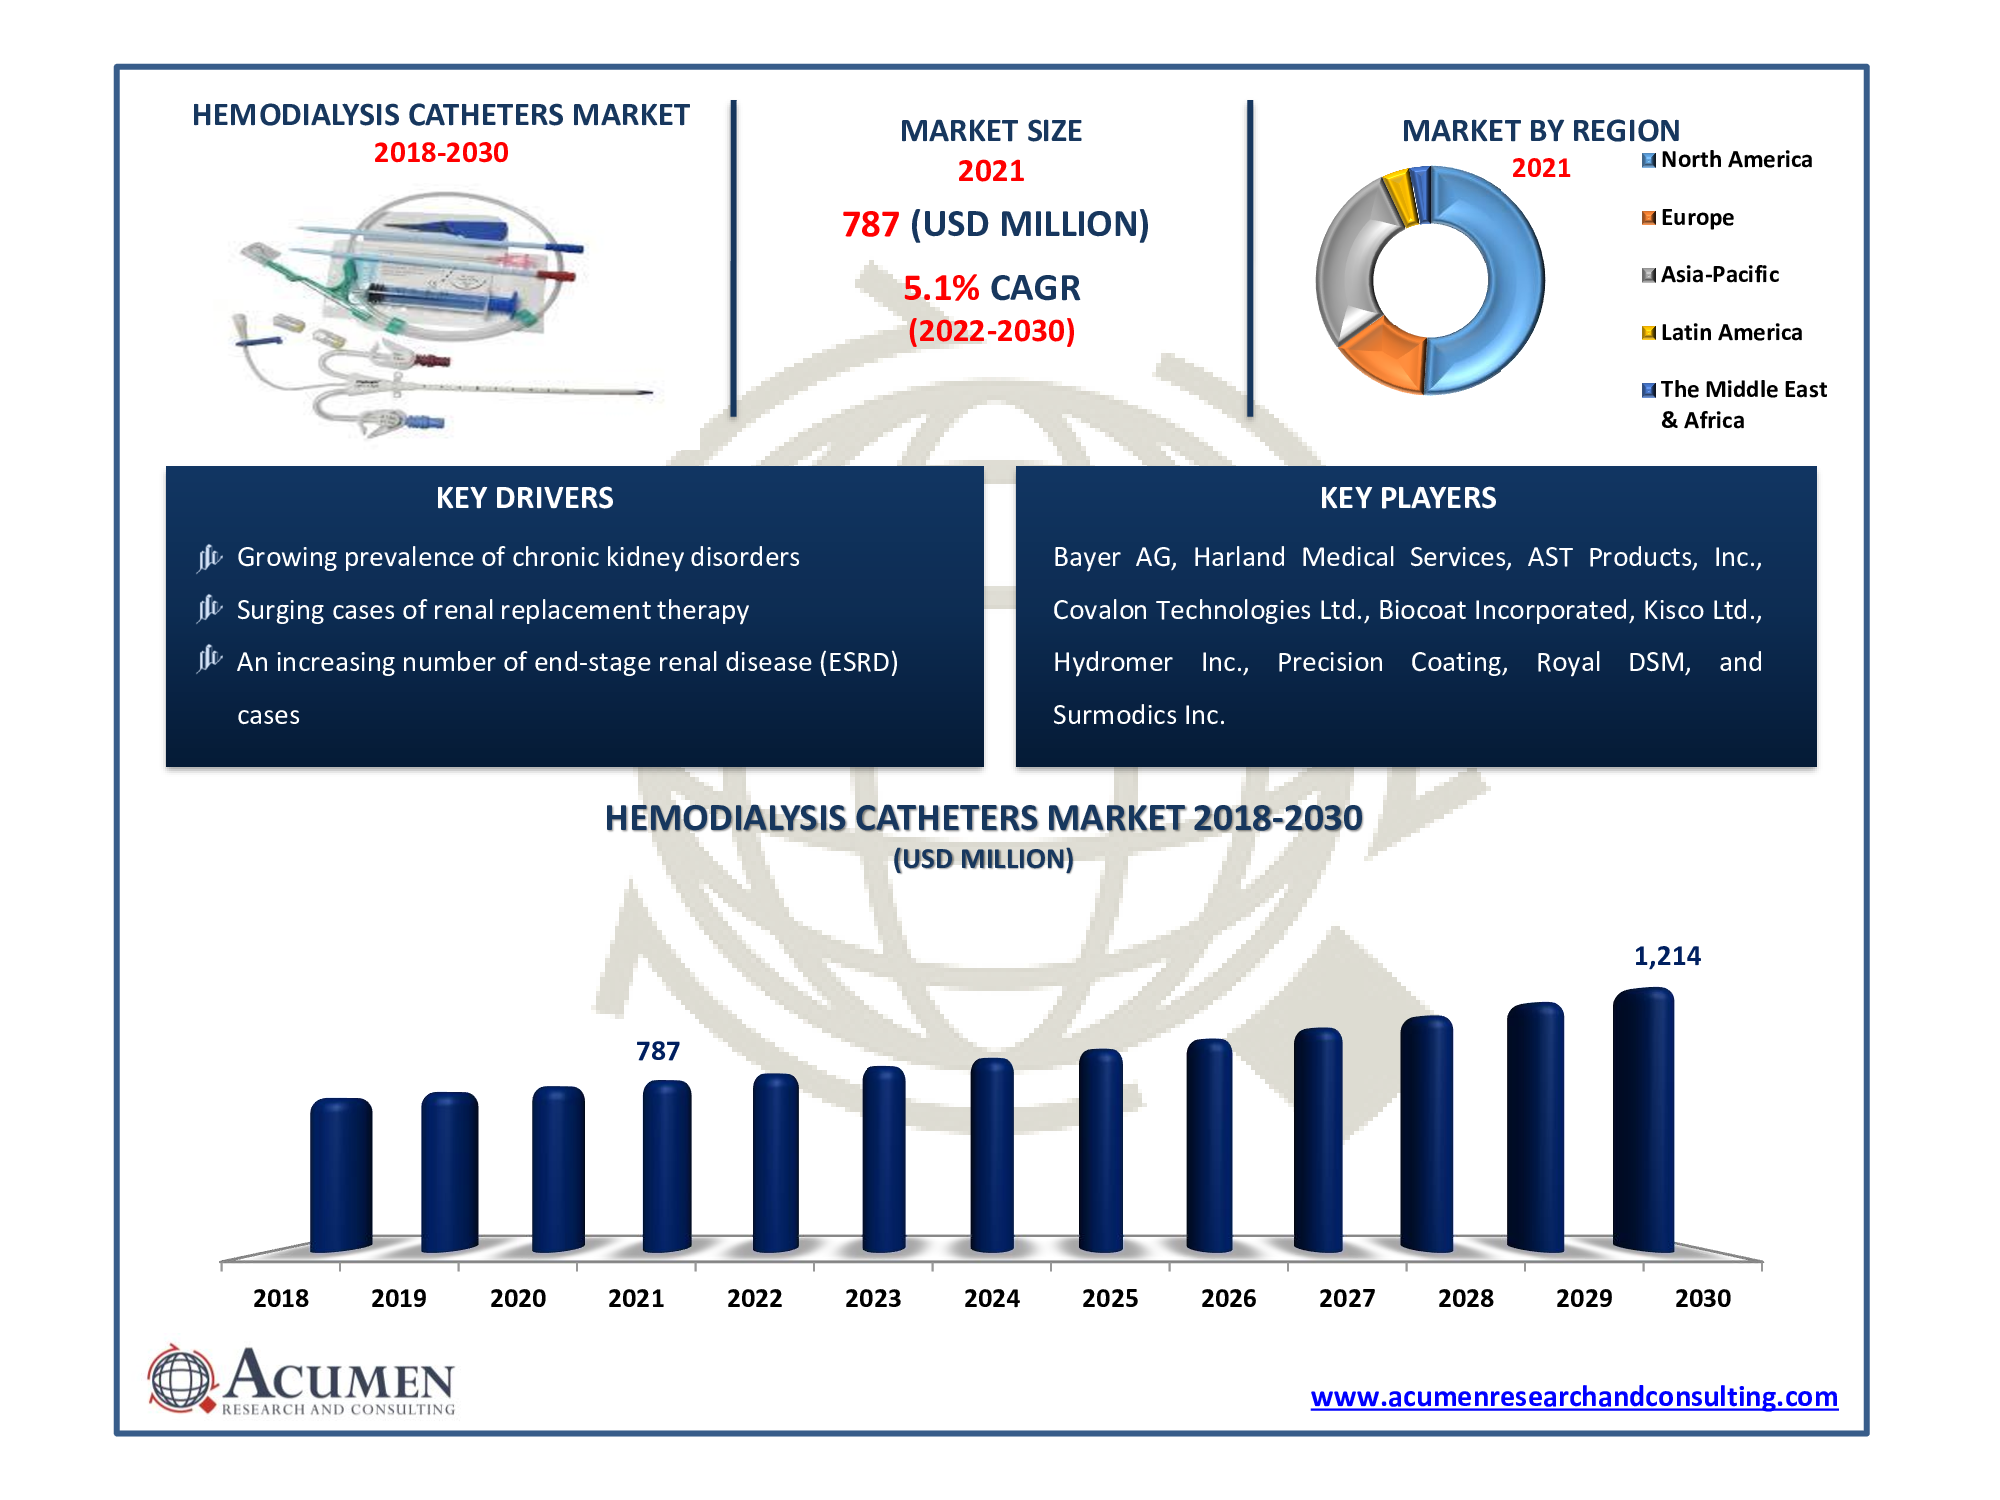 Hemodialysis Catheters Market size accounted for USD 787 Million in 2021 and is estimated to reach the market value of USD 1,214 Million by 2030.